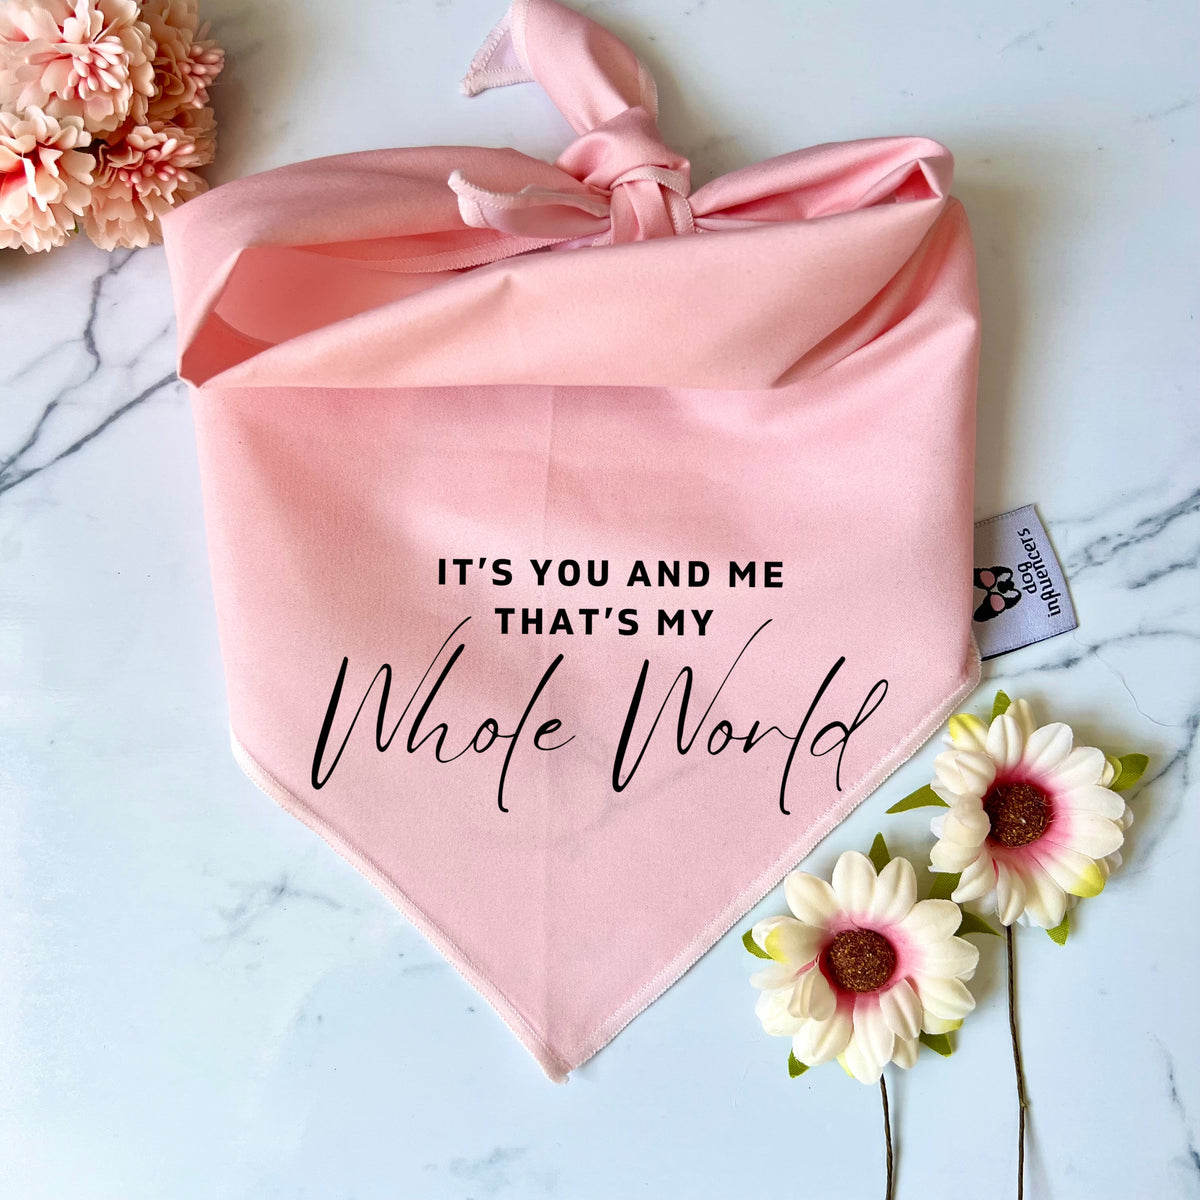 Taylor Swift Dog Bandana - "It's you and me that's my whole world" - Inspired by the song "Miss Americana & the Heartbreak Prince"